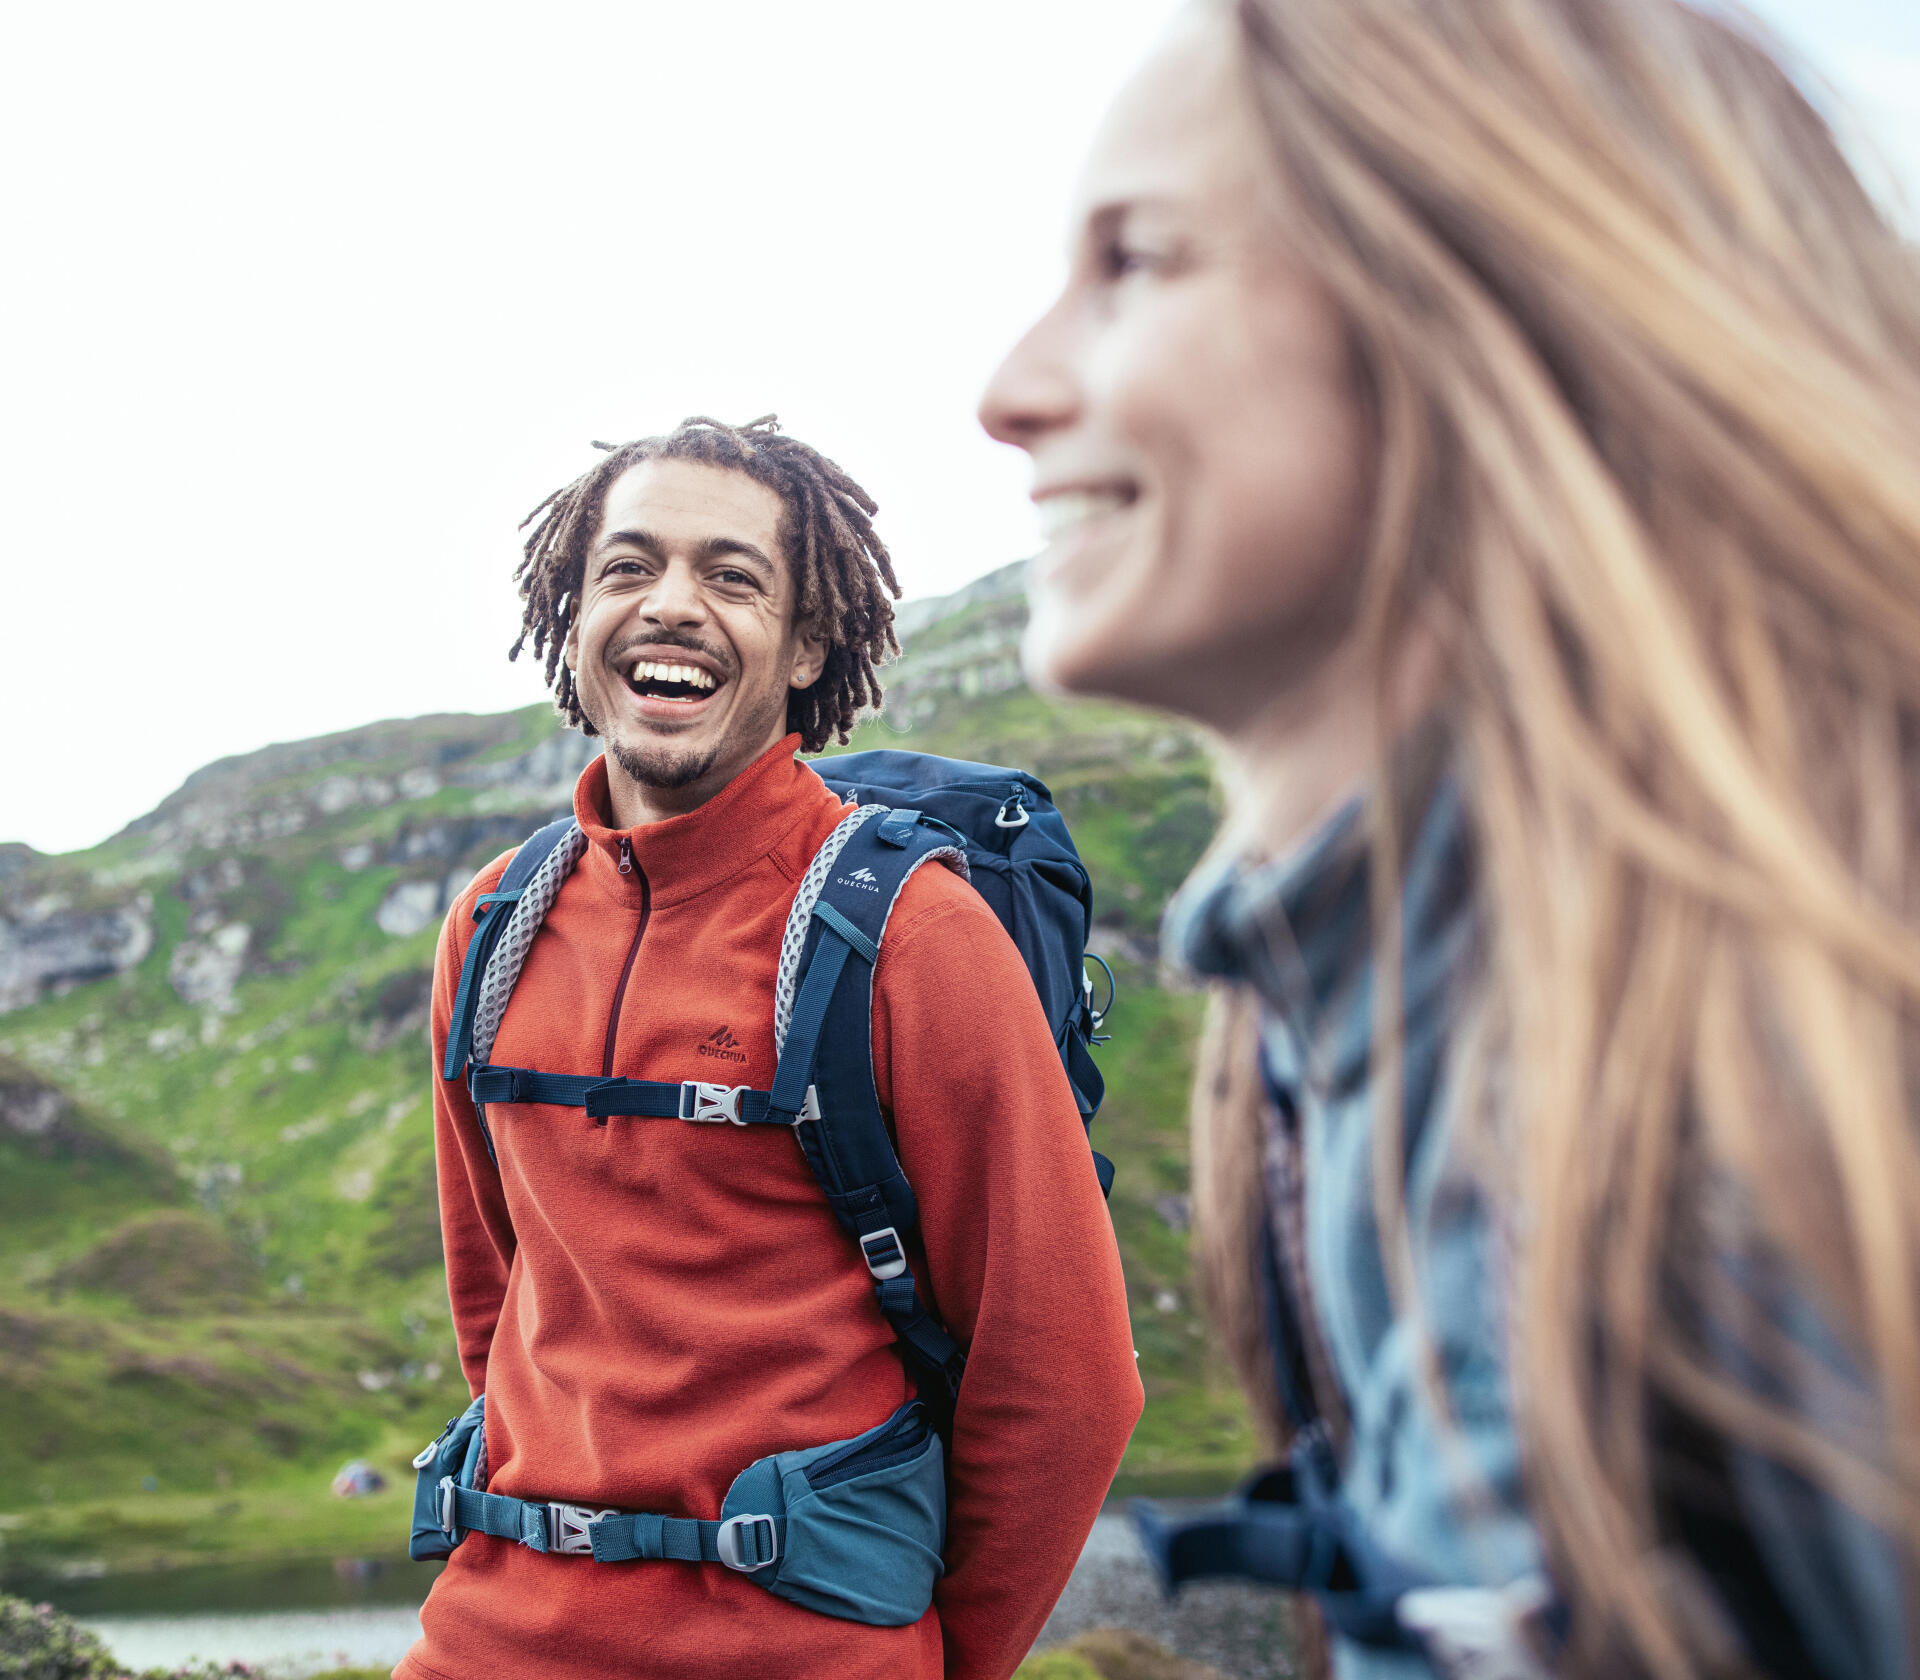 What to Wear Hiking: A Guide to Hiking Clothes and Accessories - PureWow